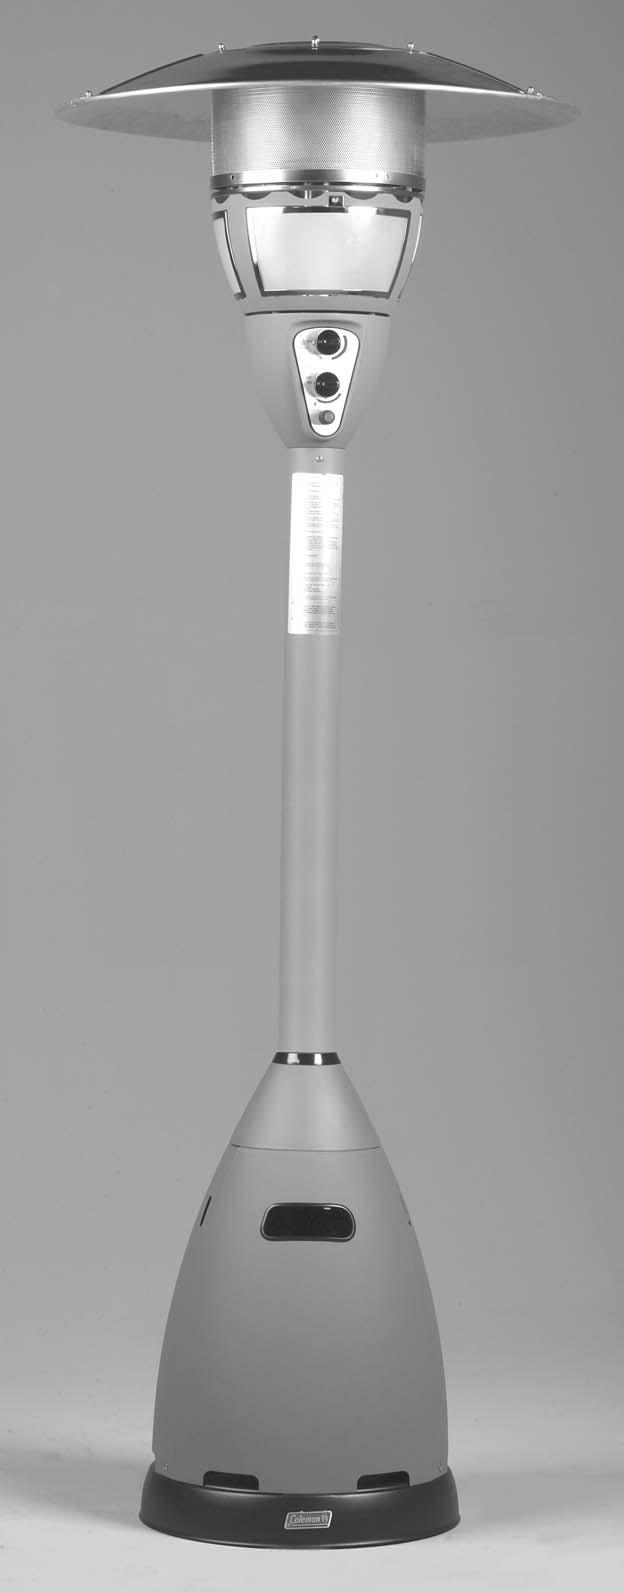 Patio Heater & Light Model 5040-761 Model 5040B747 INSTRUCTIONS FOR USE Patent #